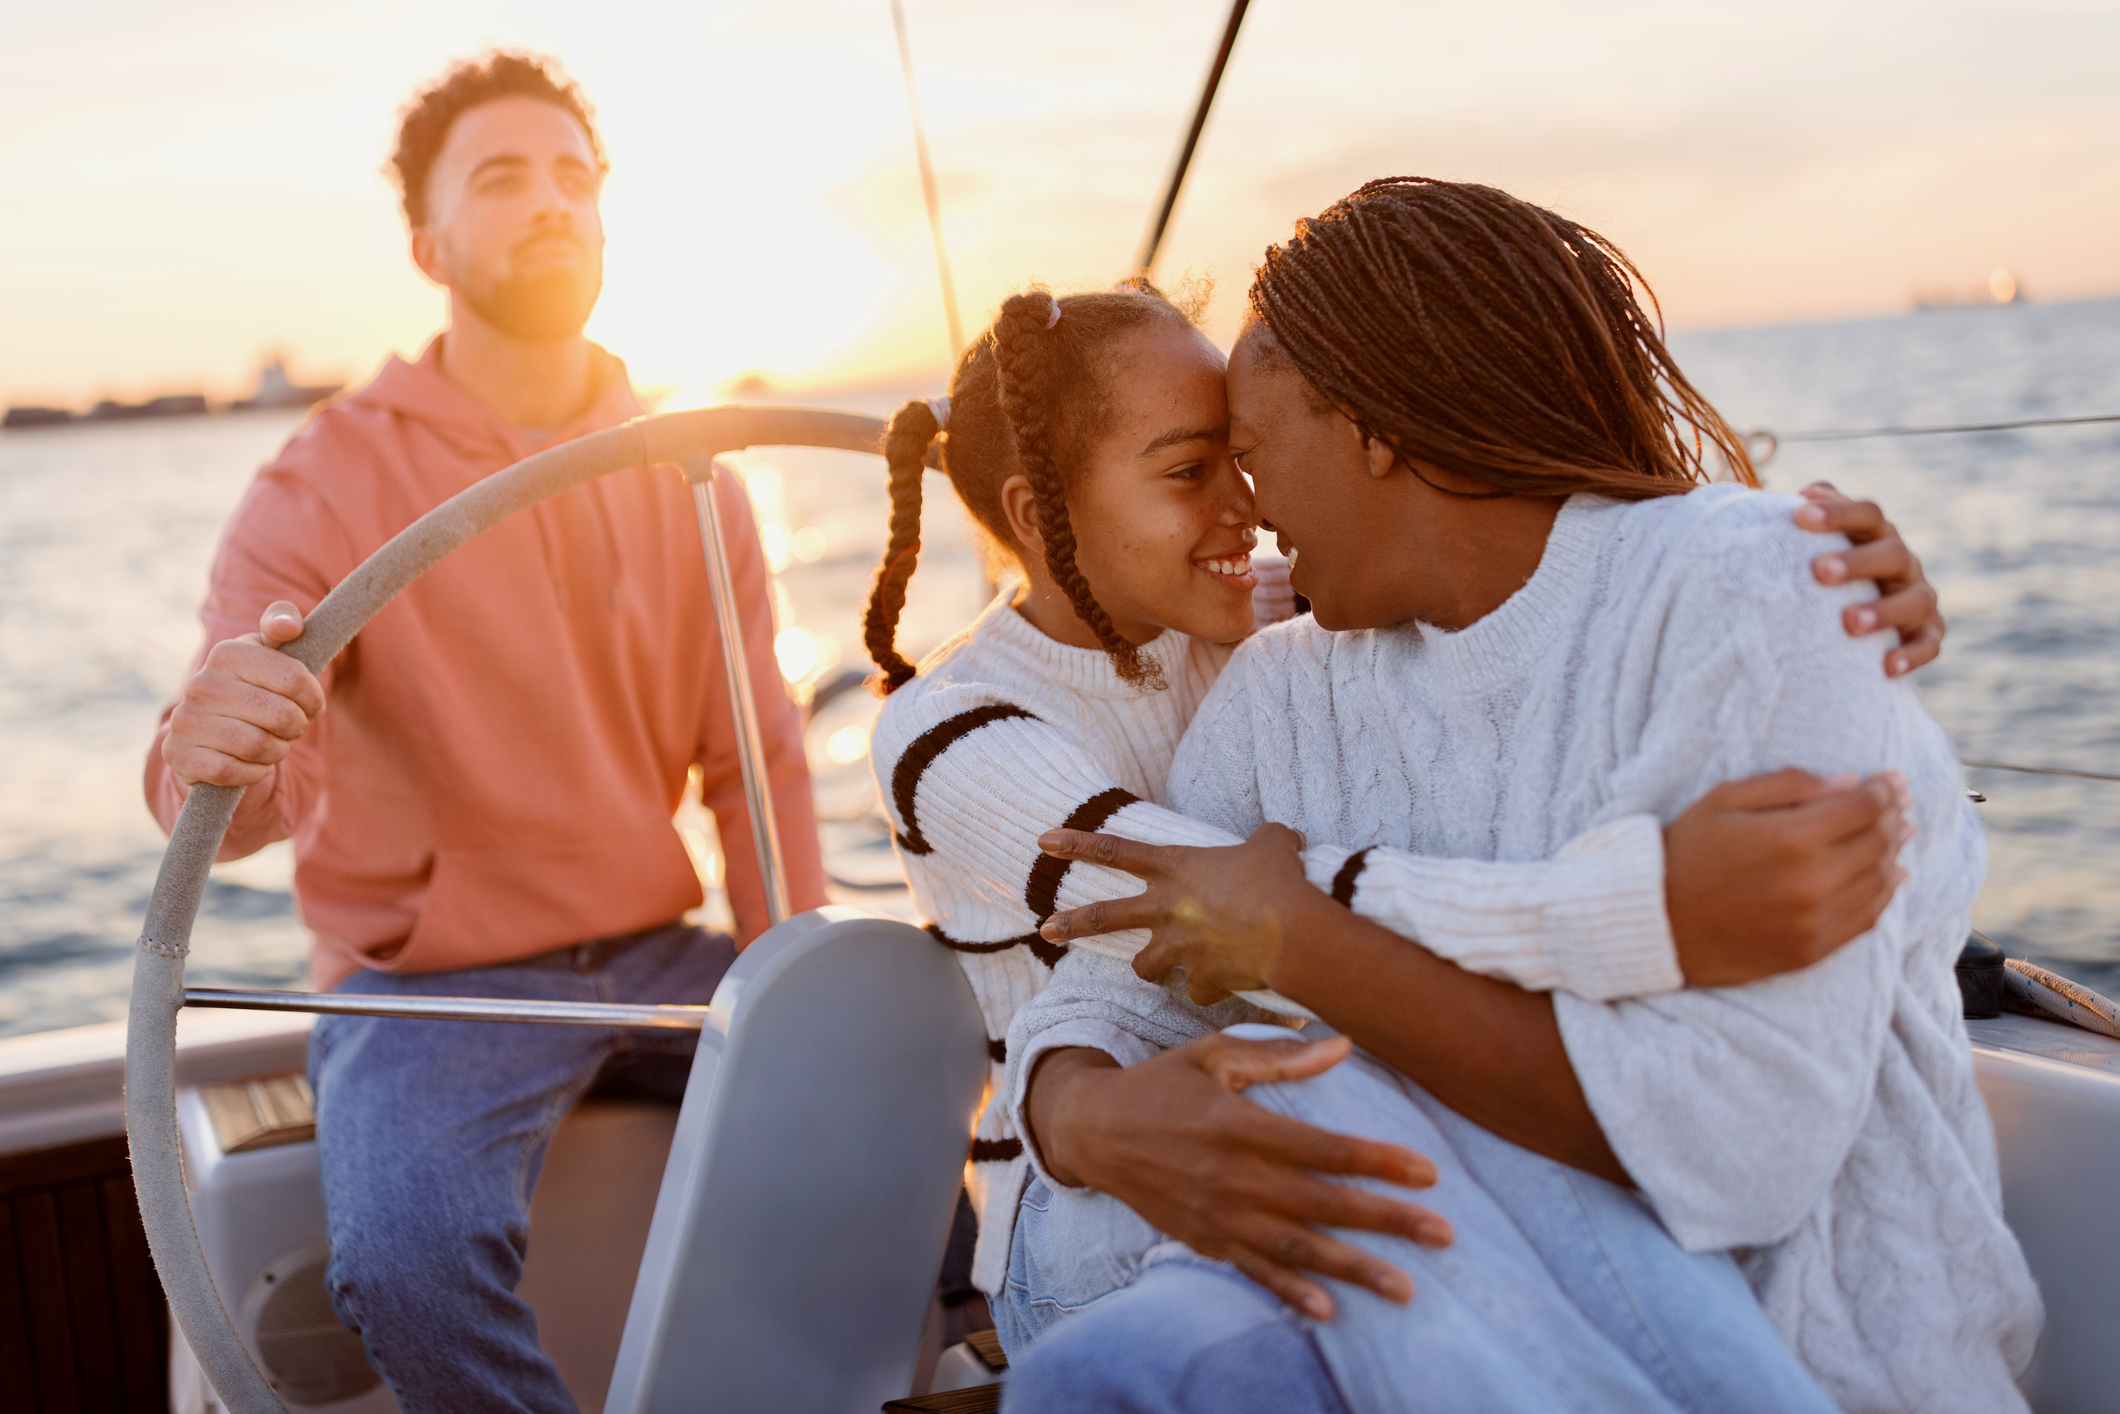 Two women embrace lovingly on a boat with a man steering in the background